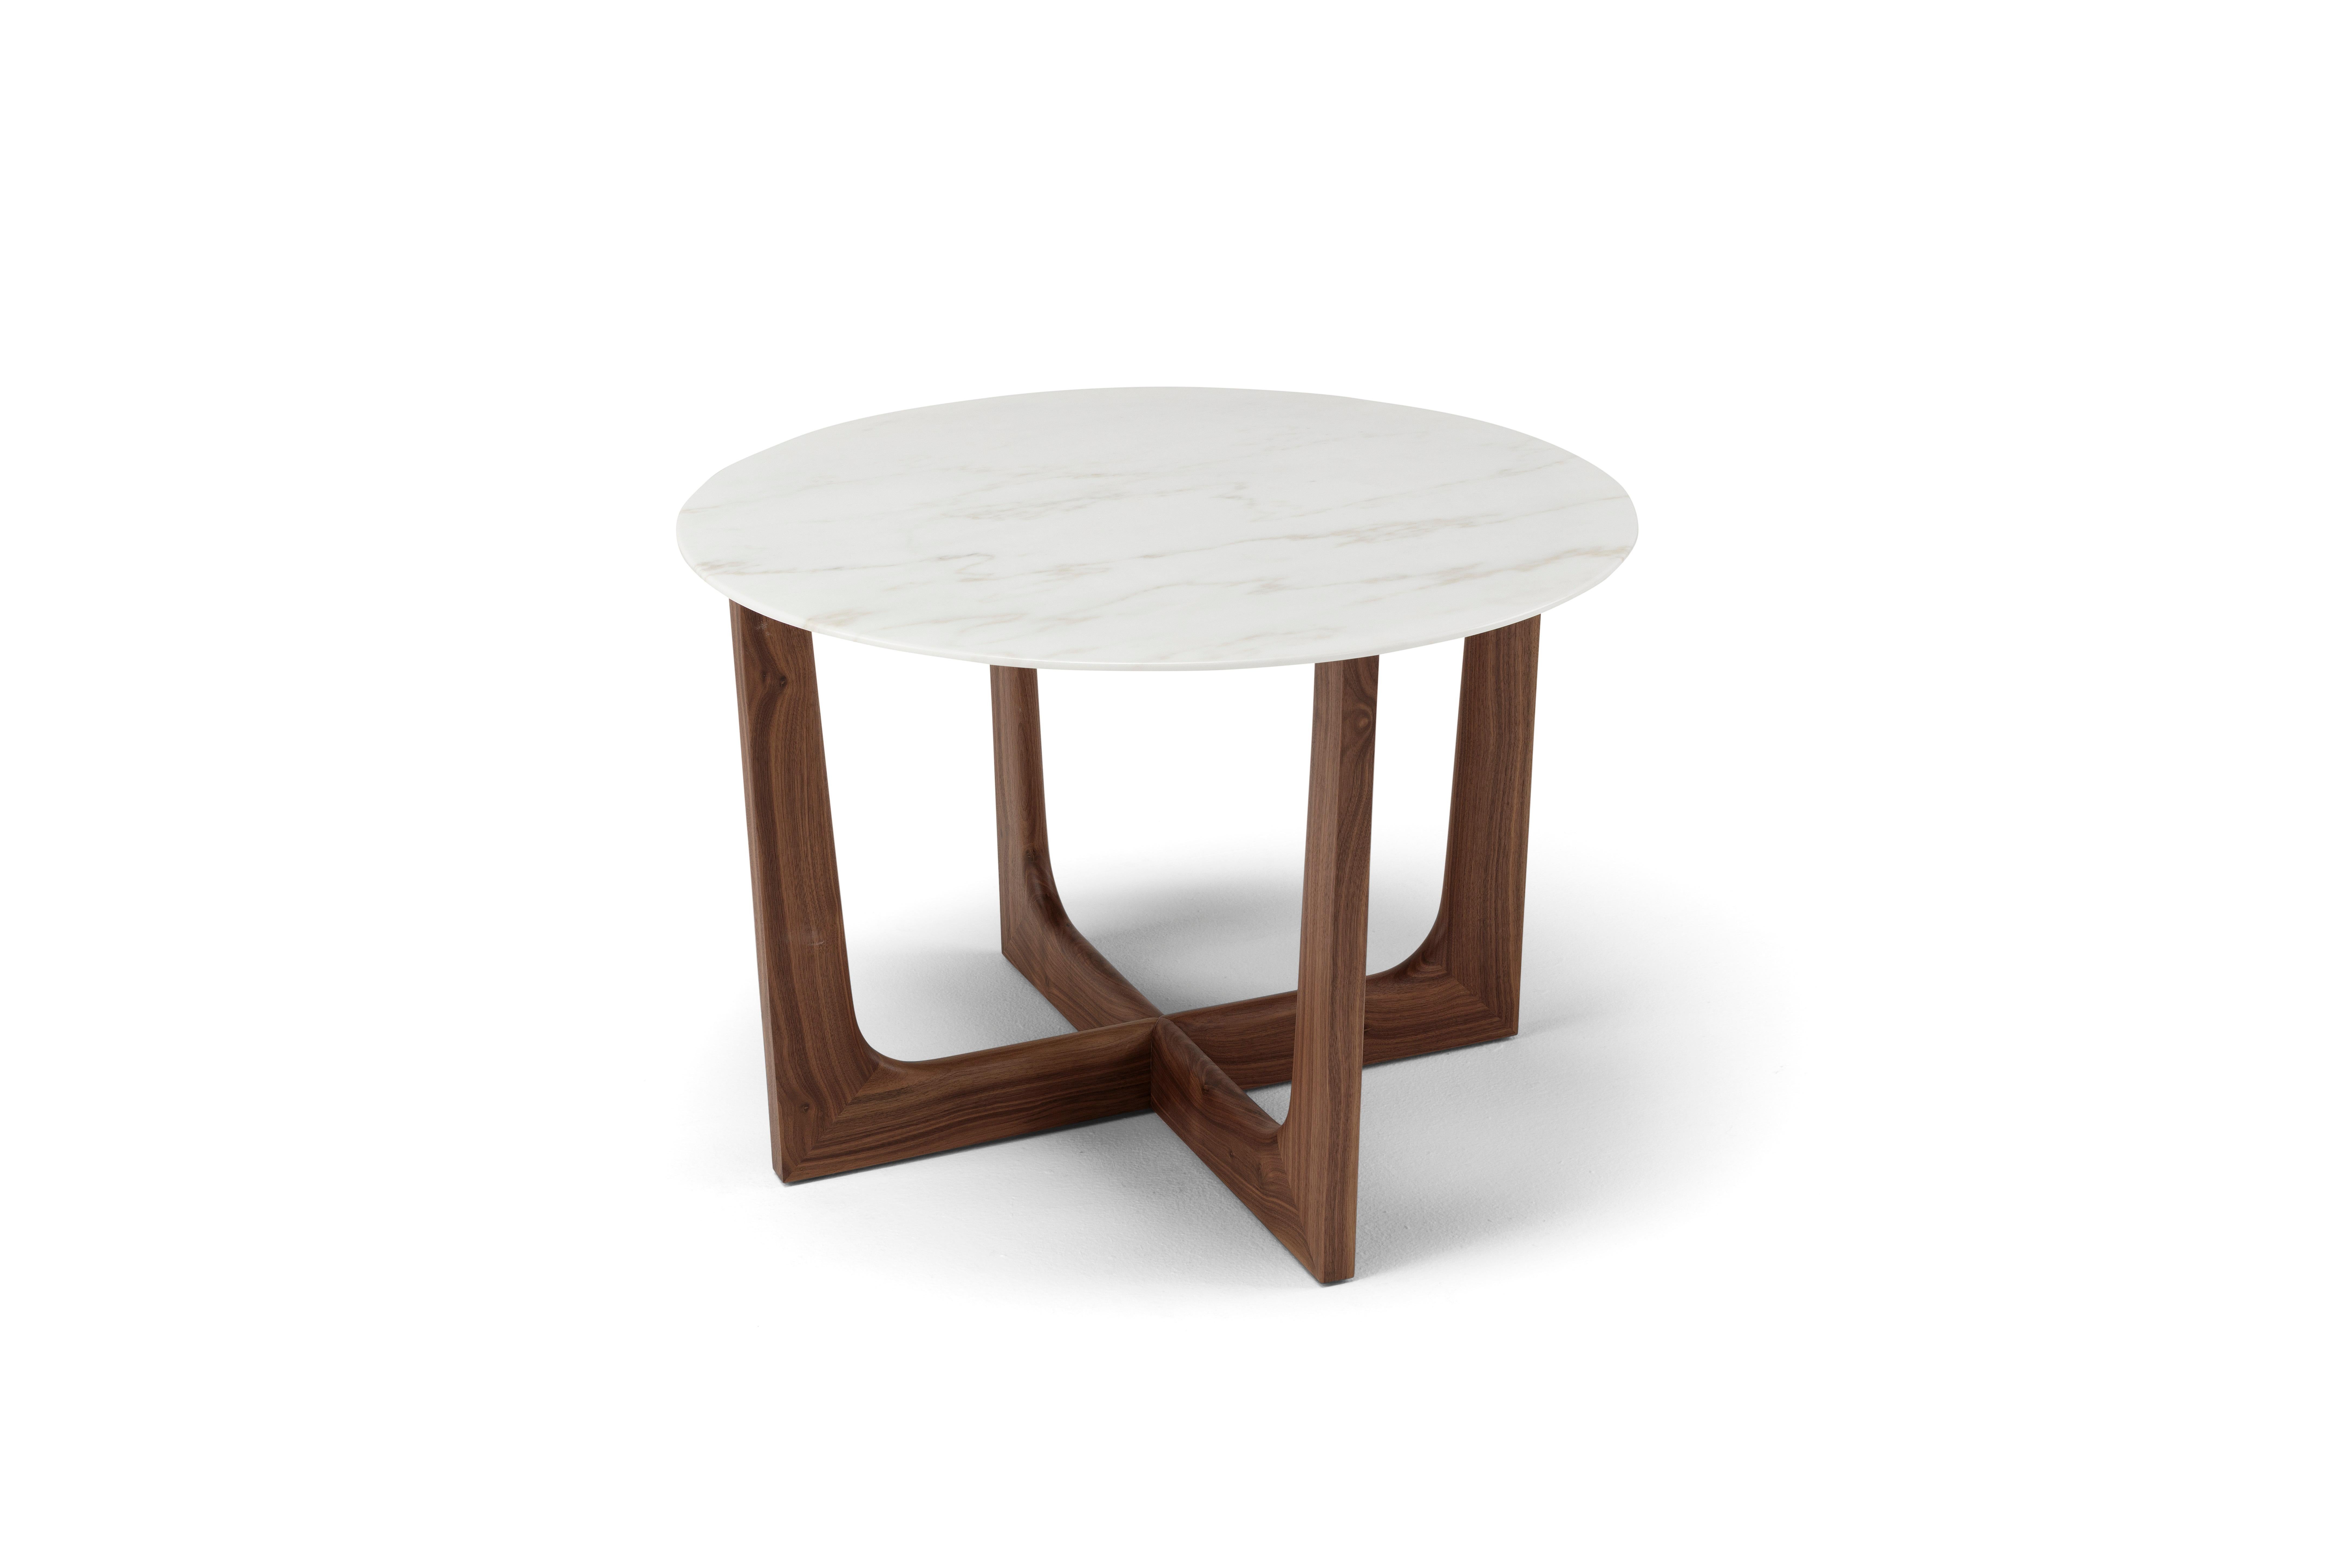 Vesta is a collection of coffee tables with wooden structures and marble tops.
Their fresh and contemporary design reveals another side of the Amura brand, that
dedicated to the ongoing research, to keep up with the spirit of the time, without